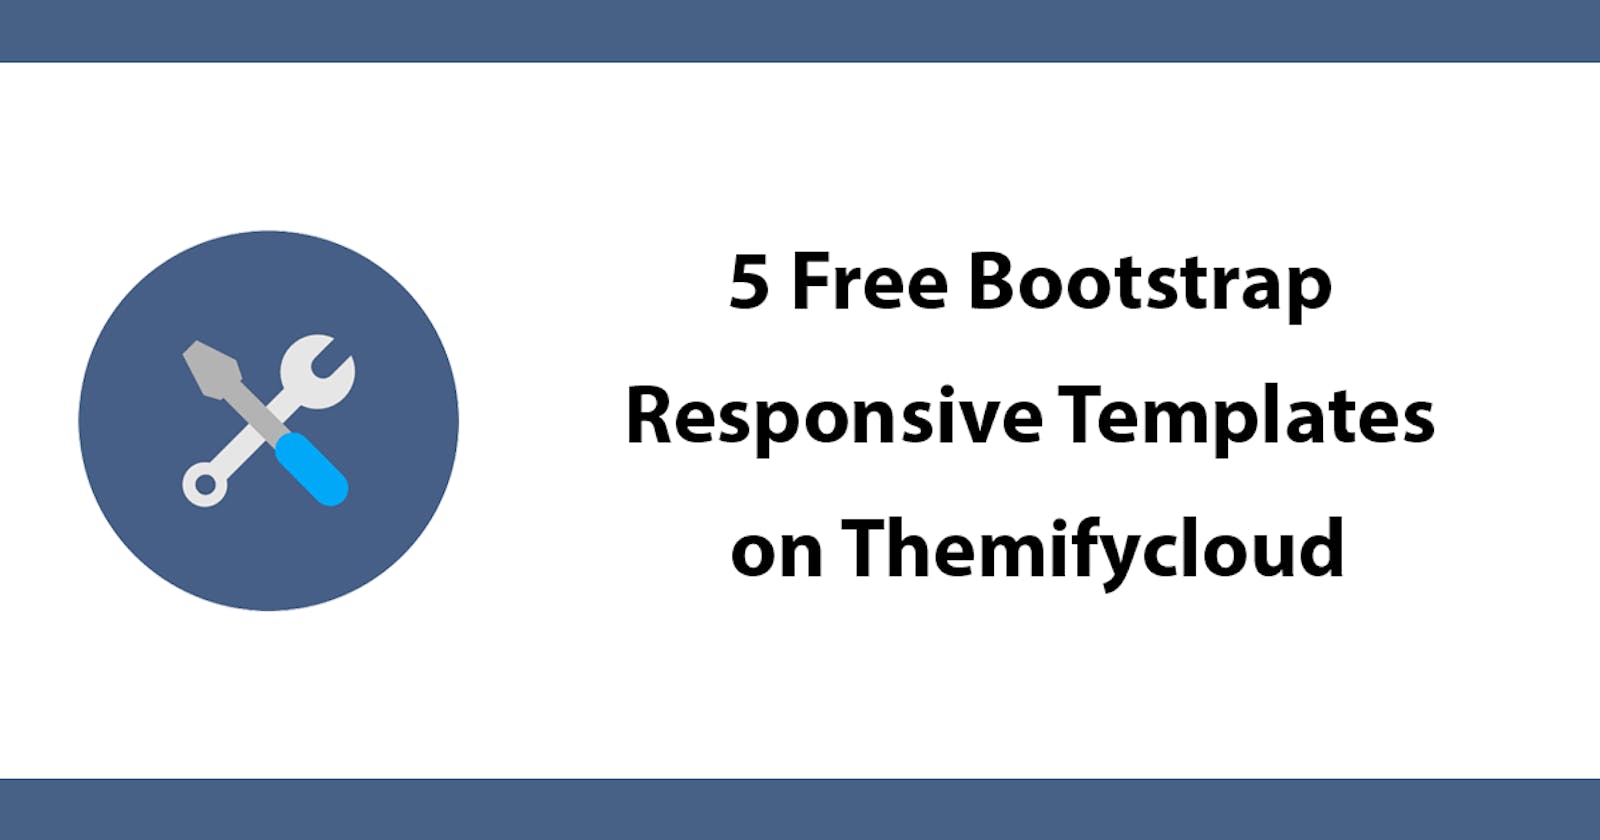 5 Free Bootstrap Responsive Templates on Themifycloud